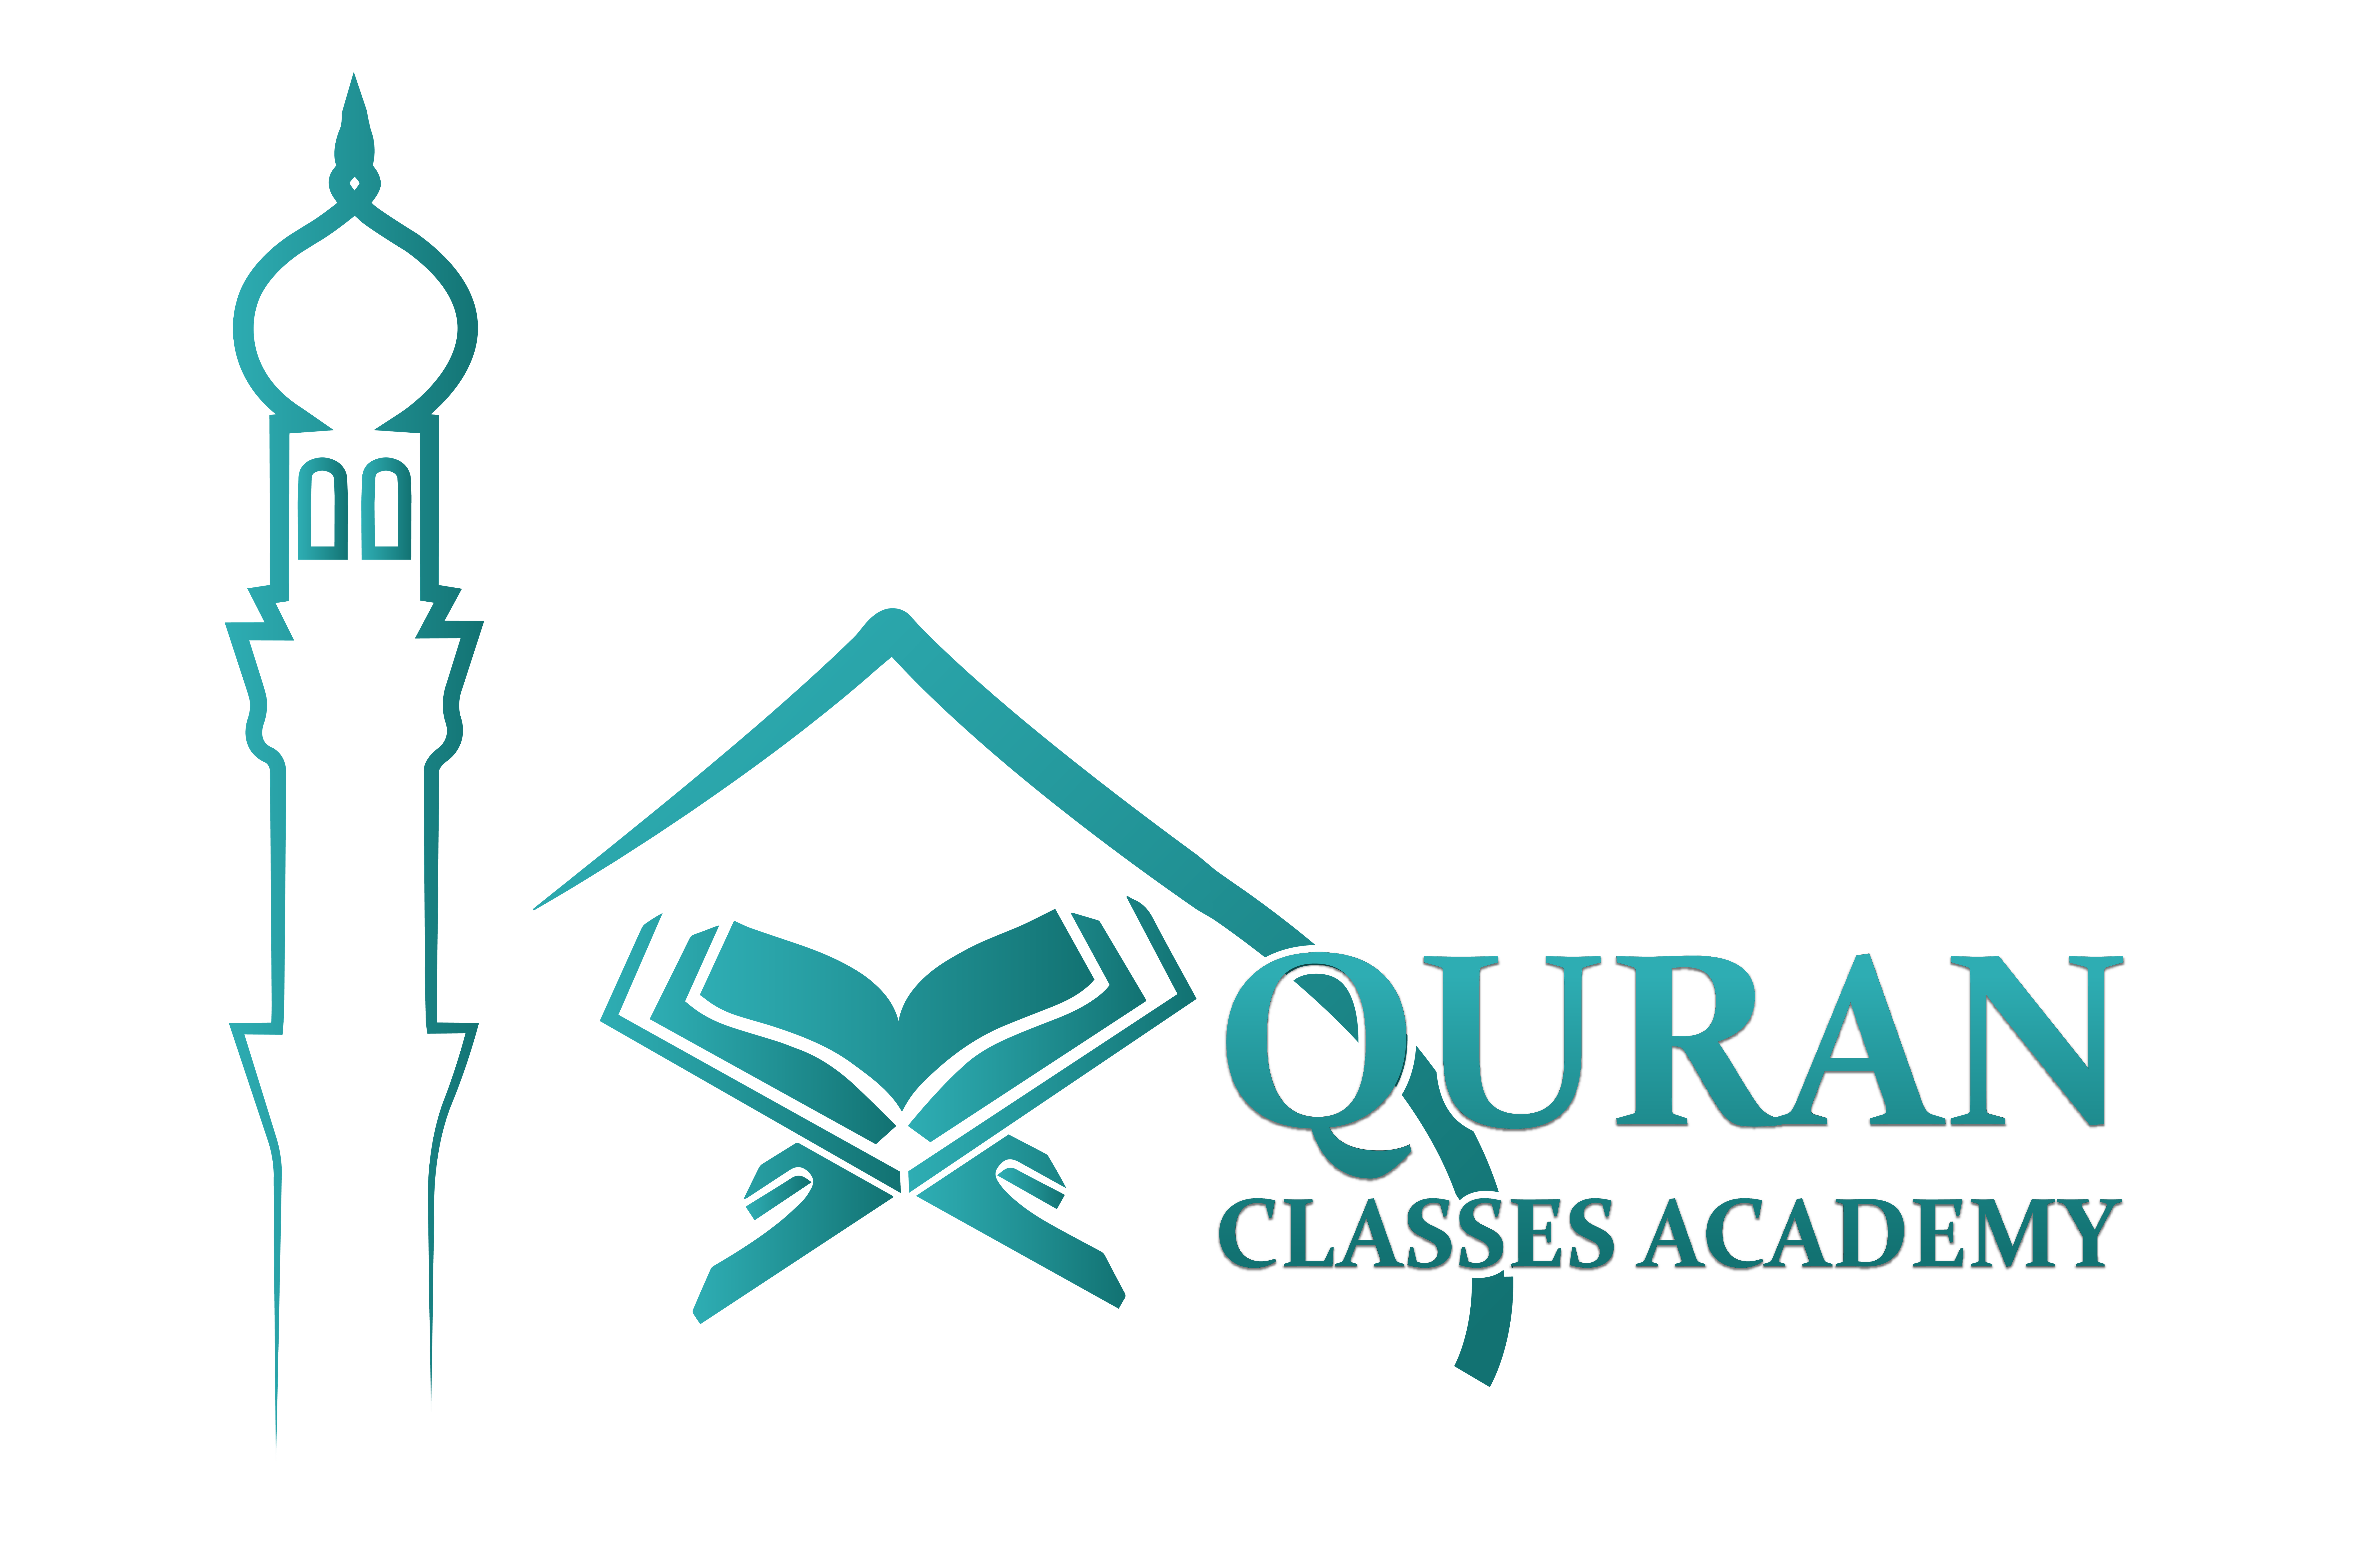 Learn Quran Classes Academy